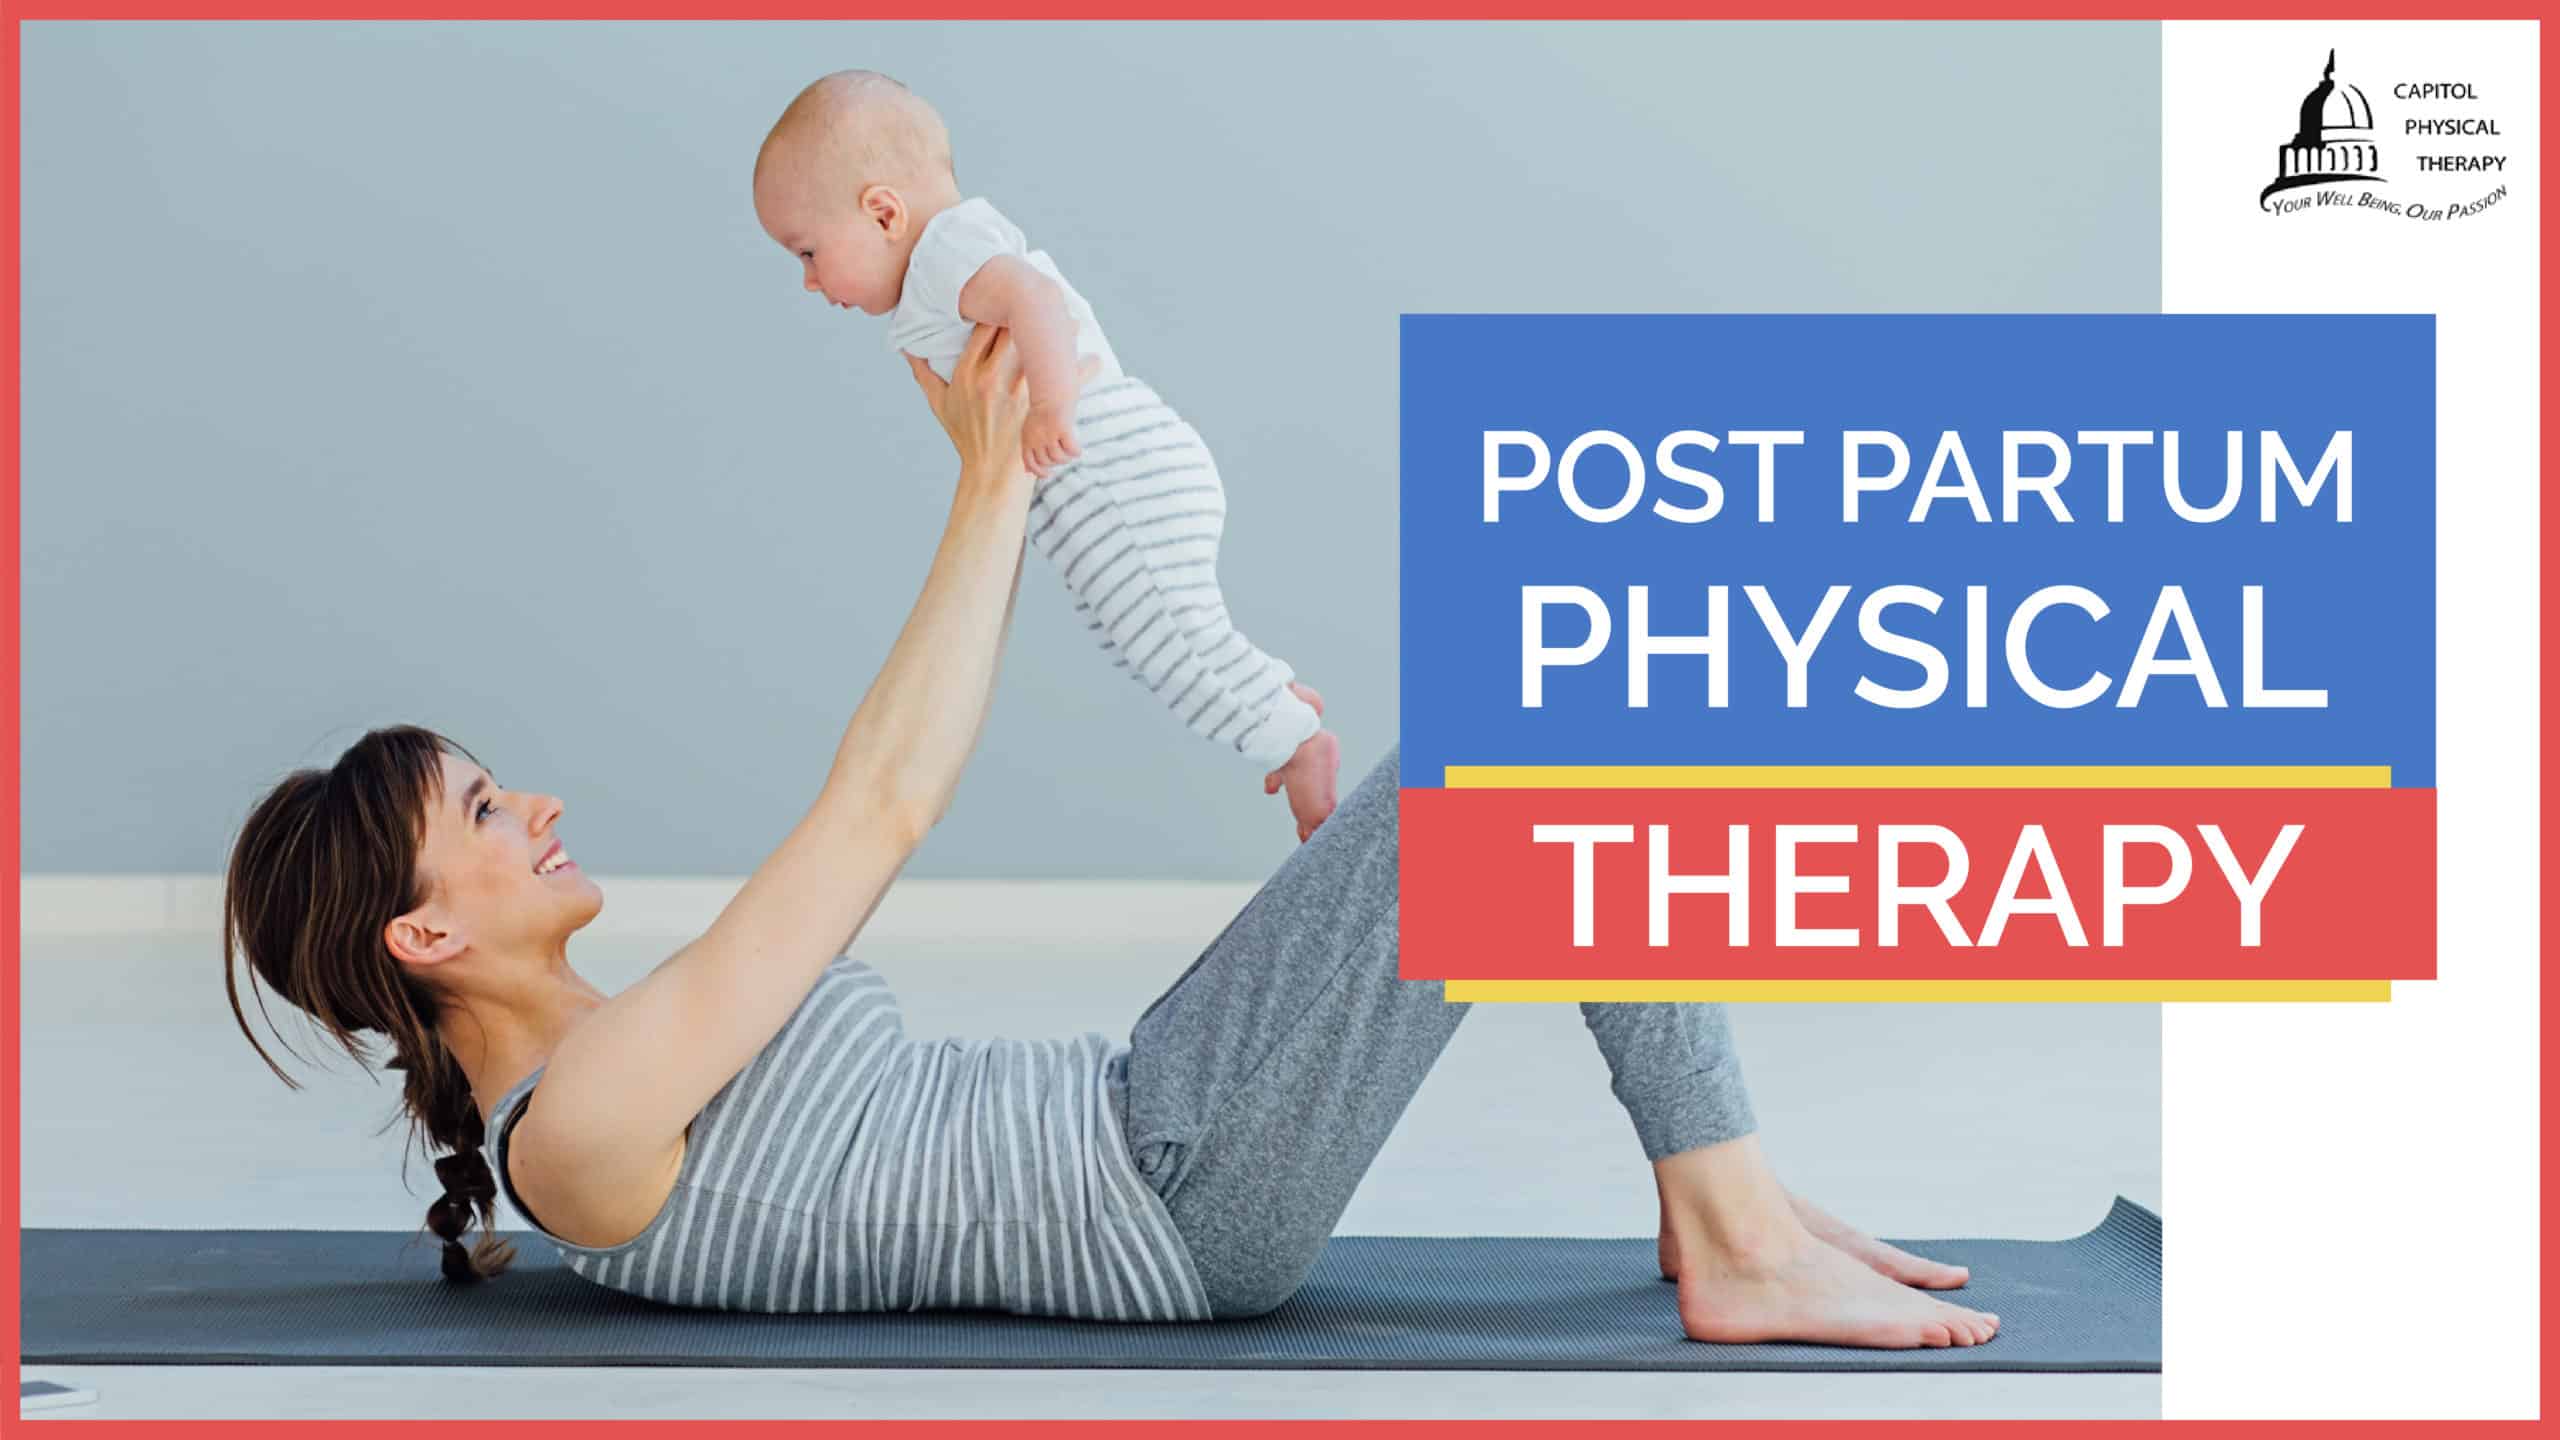 Post-Partum Physical Therapy Solutions | Capitol Physical Therapy Washington DC | Pain & Injury Management